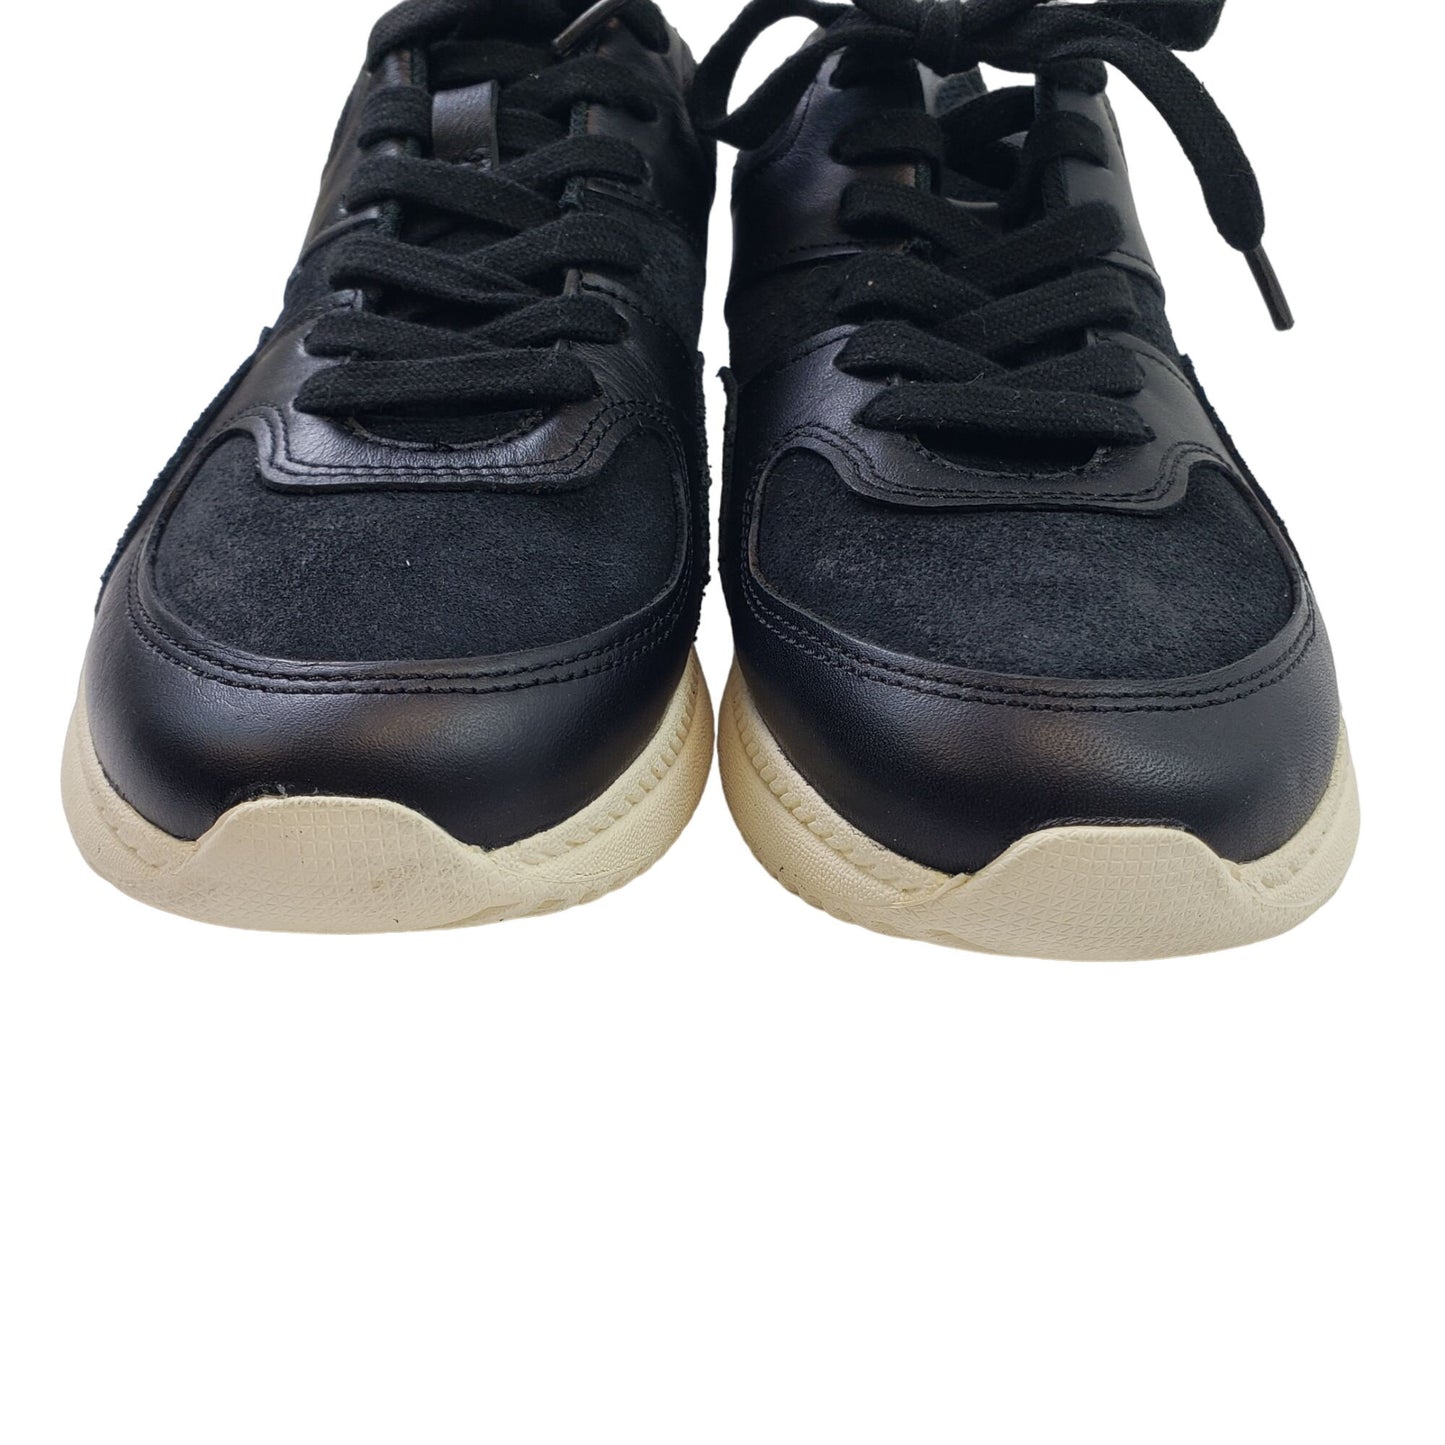 NWOB Everlane O by Everlane The Trainer Leather Sneakers Size 7 Women's/5 Men's